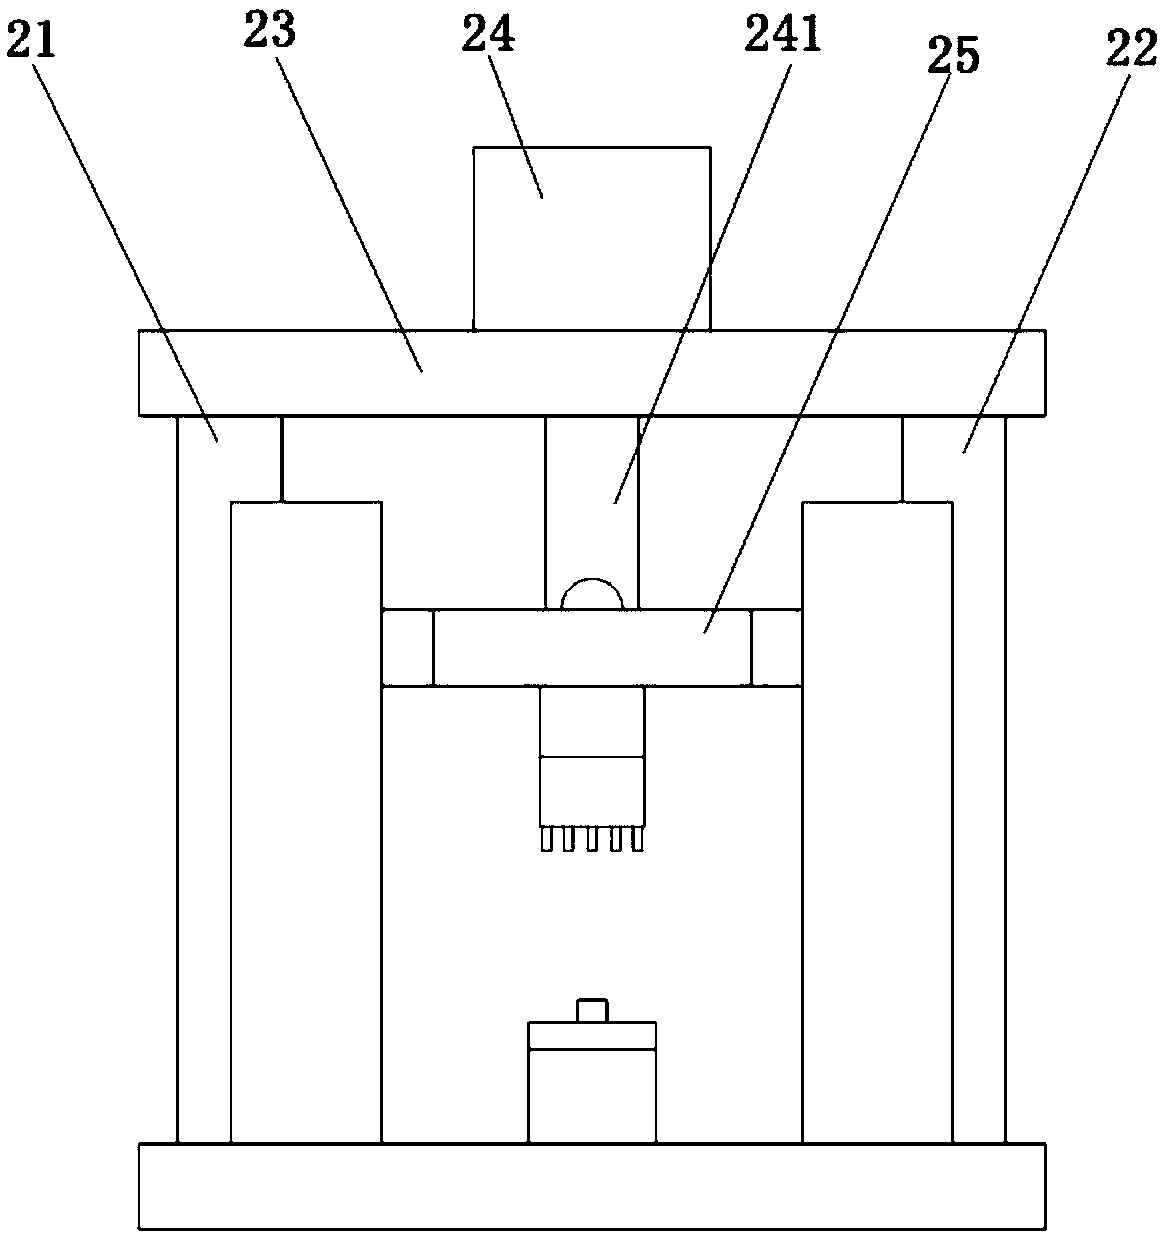 Bearing ball missing detecting device